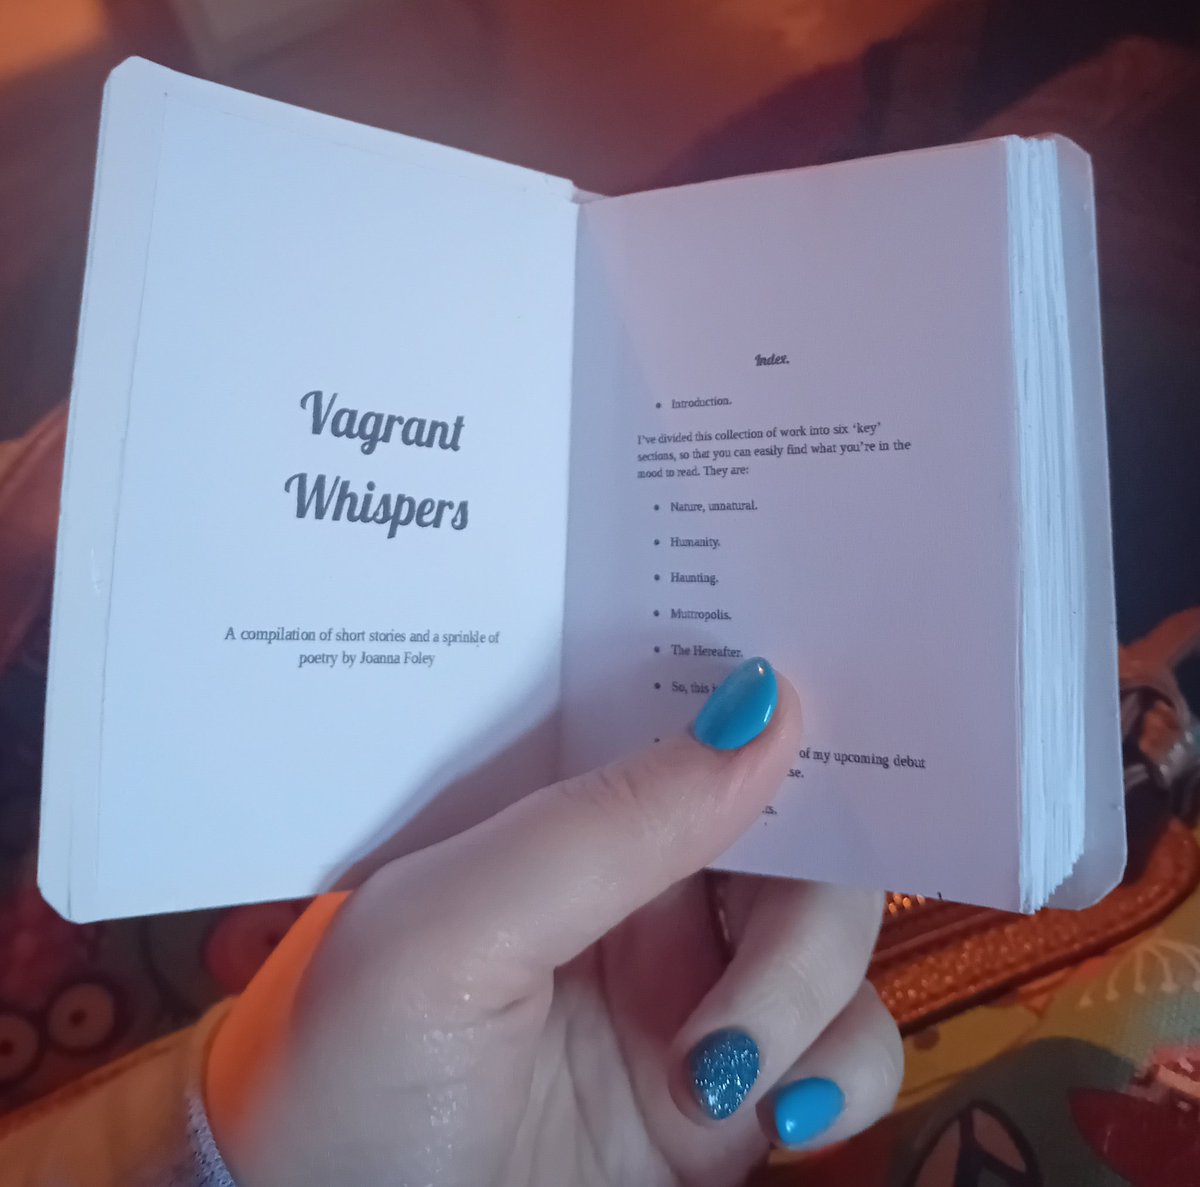 I have some very #excitingnews coming up for this #summer. Can't go into more details right now, but I am extatic! Sharing this mini printout I did of my upcoming book of short stories,#VagrantWhispers. #irishwriter #writerslife #WritingCommunity #prose #poetry #amwriting